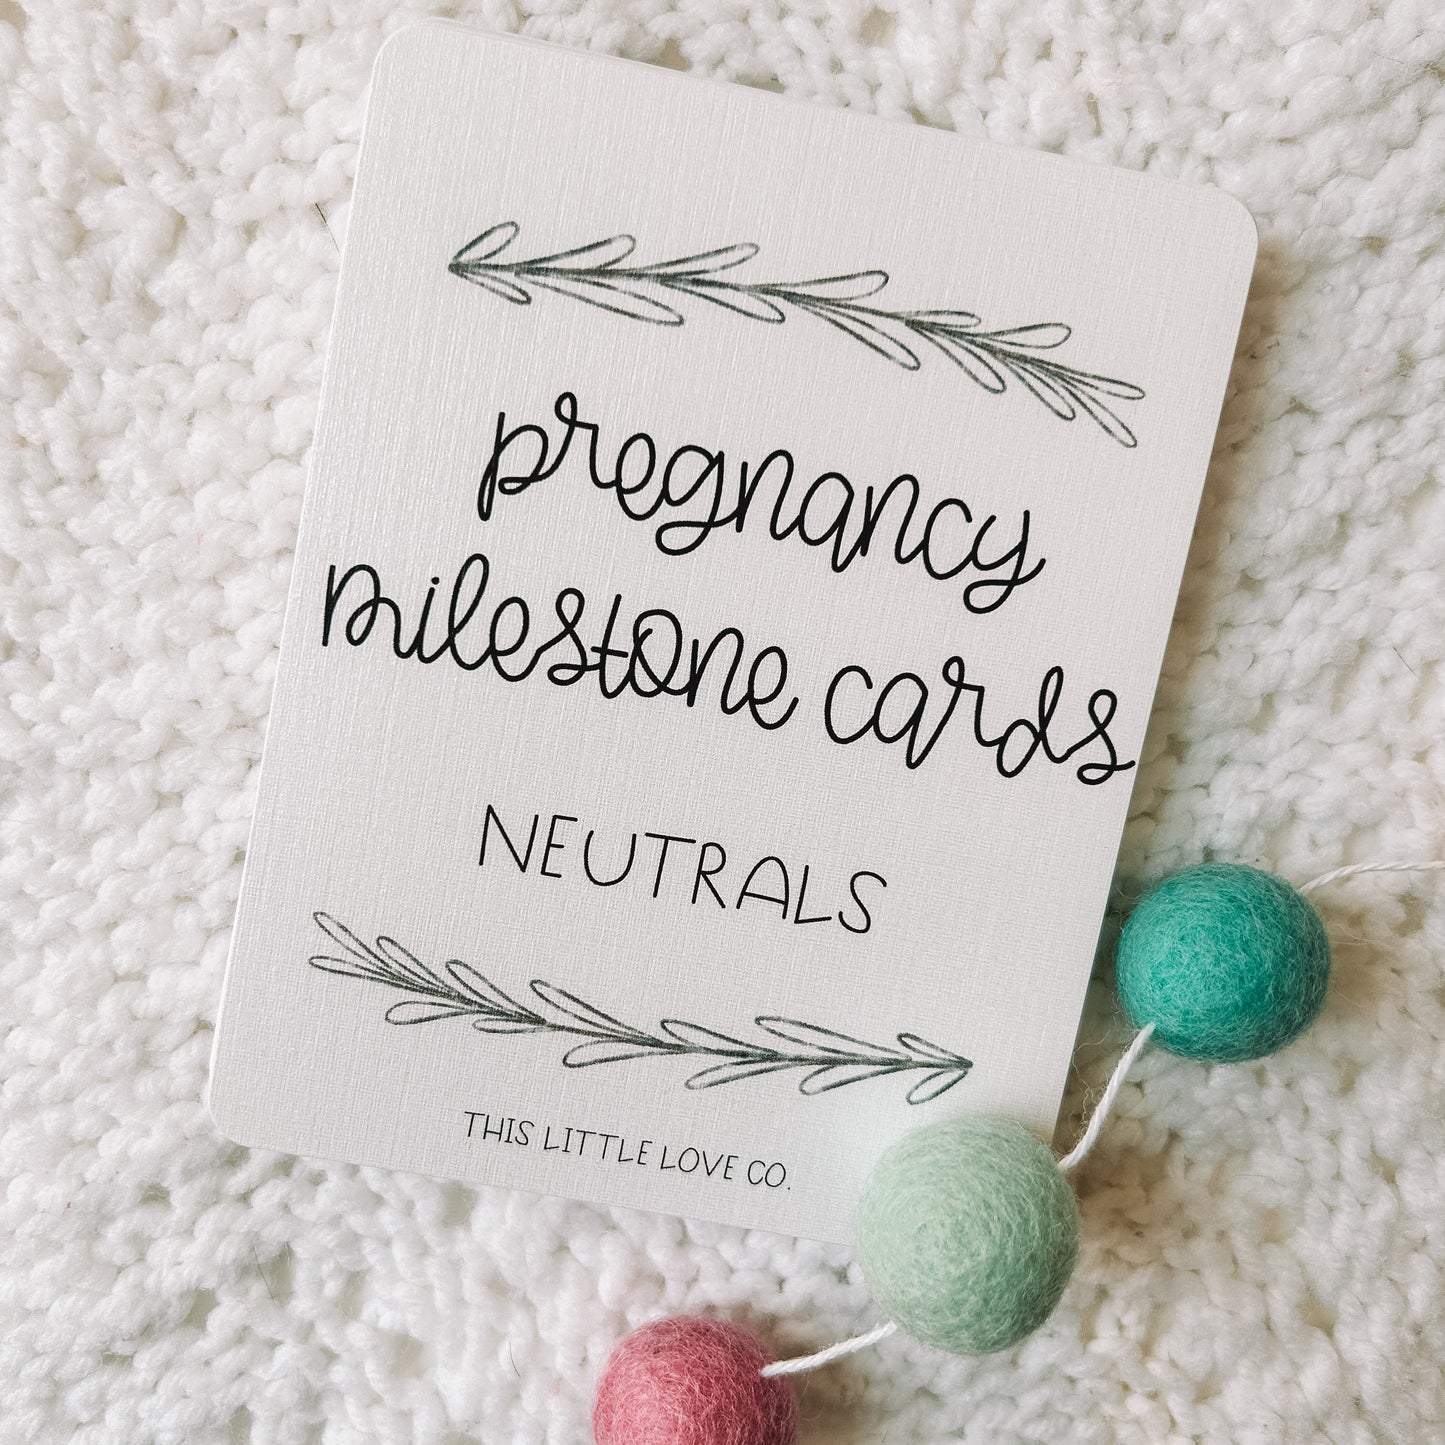 Card with black text that reads pregnancy milestone cards neutrals. There is an image of a leafed branch above and below the text and the text This Little Love Co at the bottom of the card.